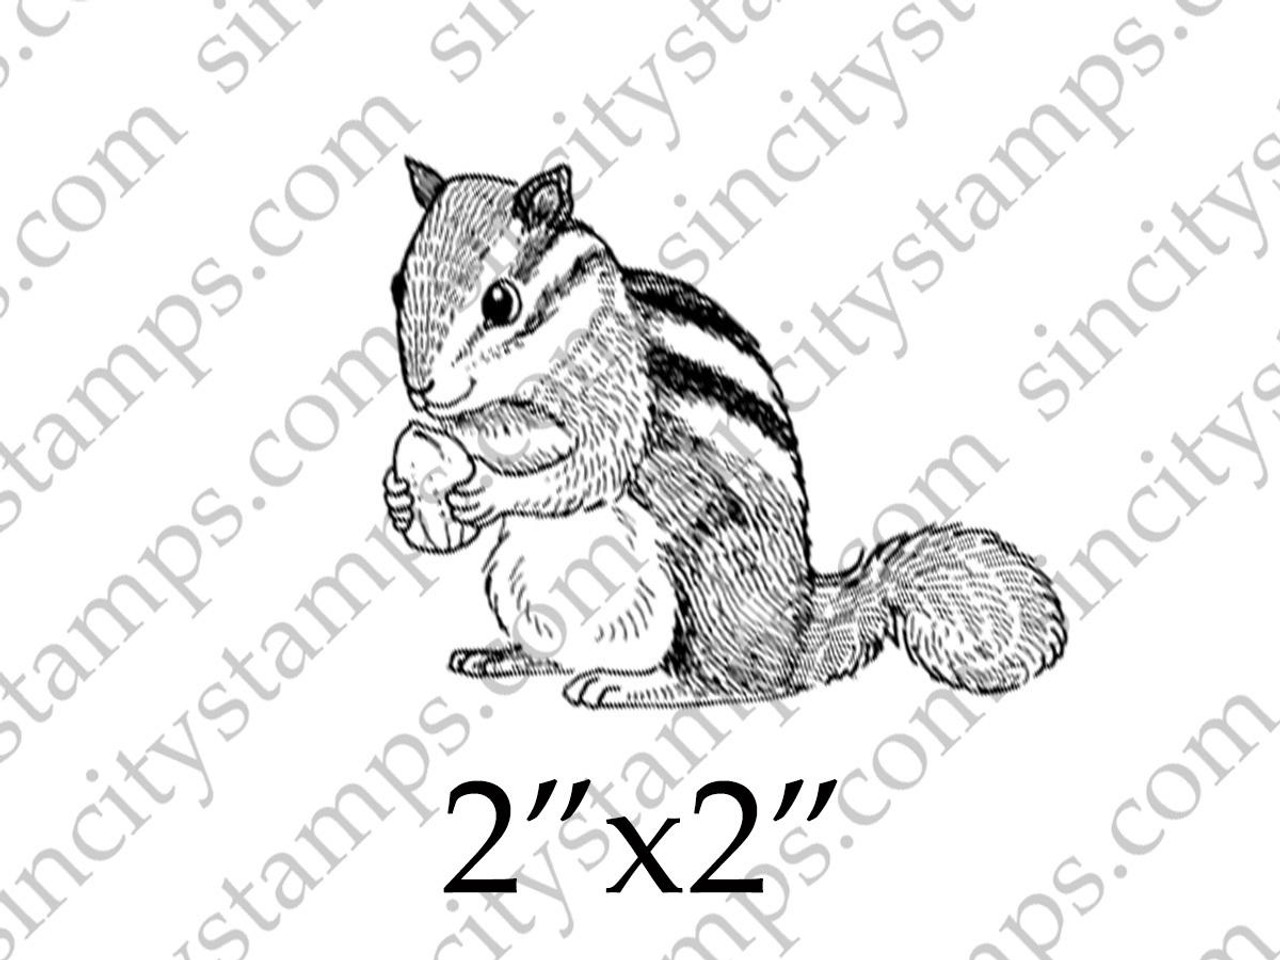 Chipmunk Wildlife Animal Rubber Stamp SC74-4 - Blank Page Muse Art Rubber  Stamps